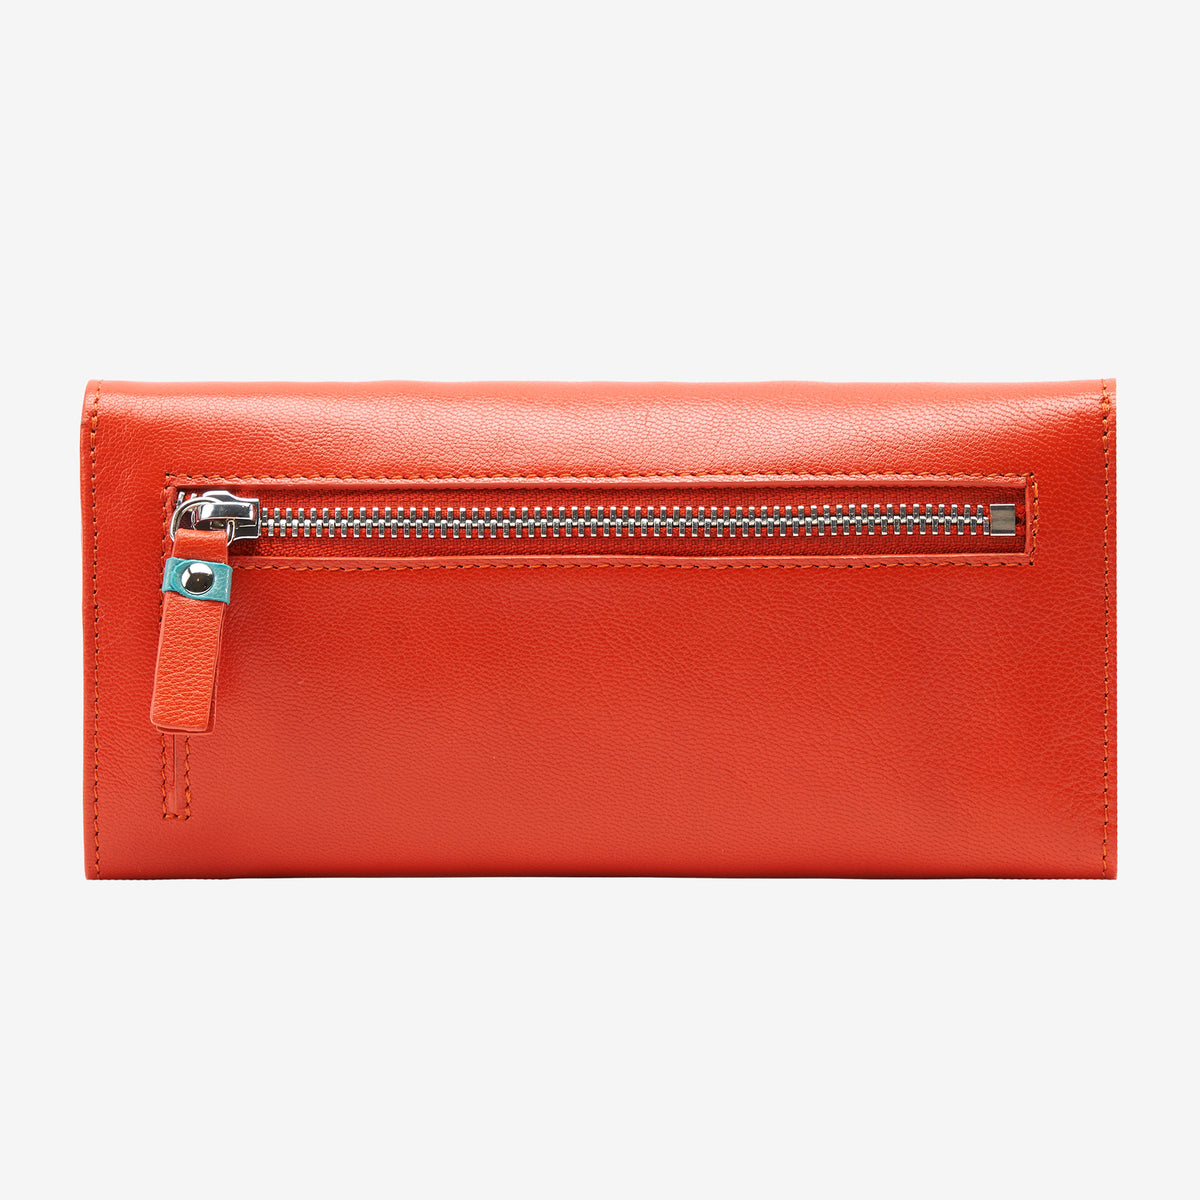     tusk-jr-494-womens-siam-leather-accordion-wallet-orange-and-sky-back